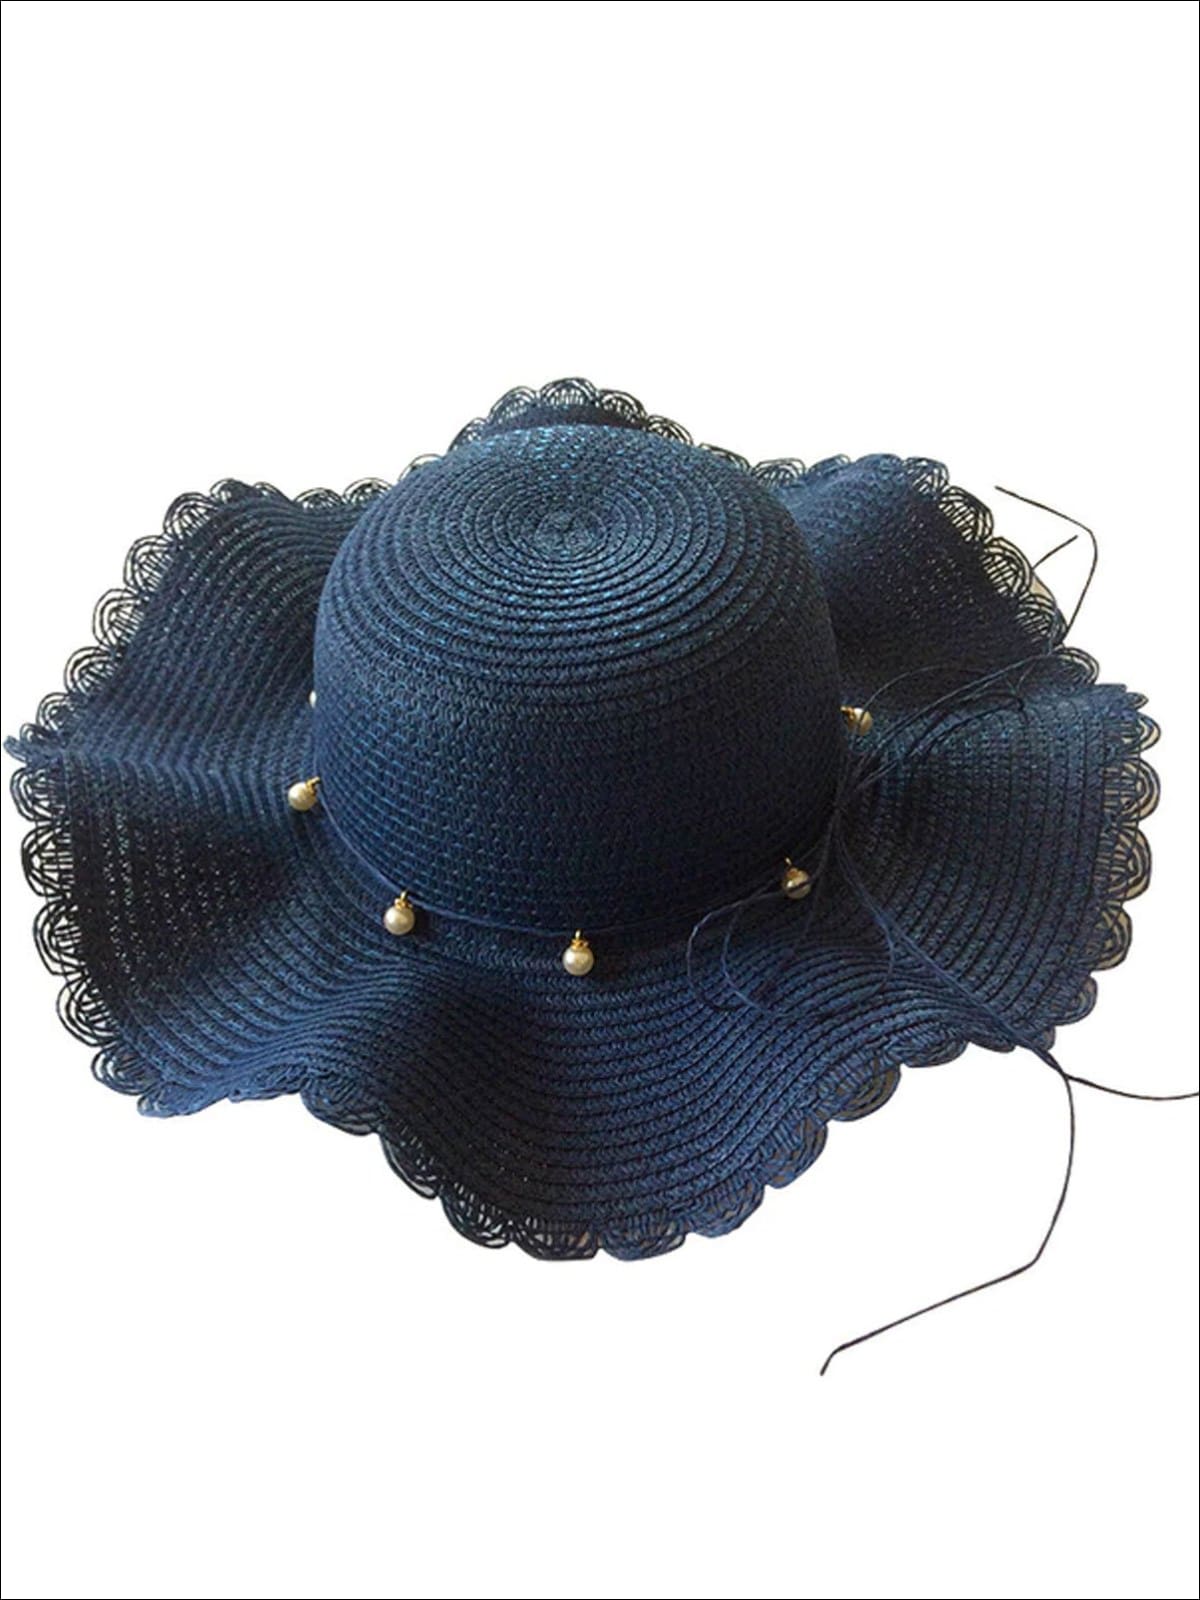 Girls Pearl Embellished Wave Straw Hat - Navy Blue / 2-5 years - Girls Hats